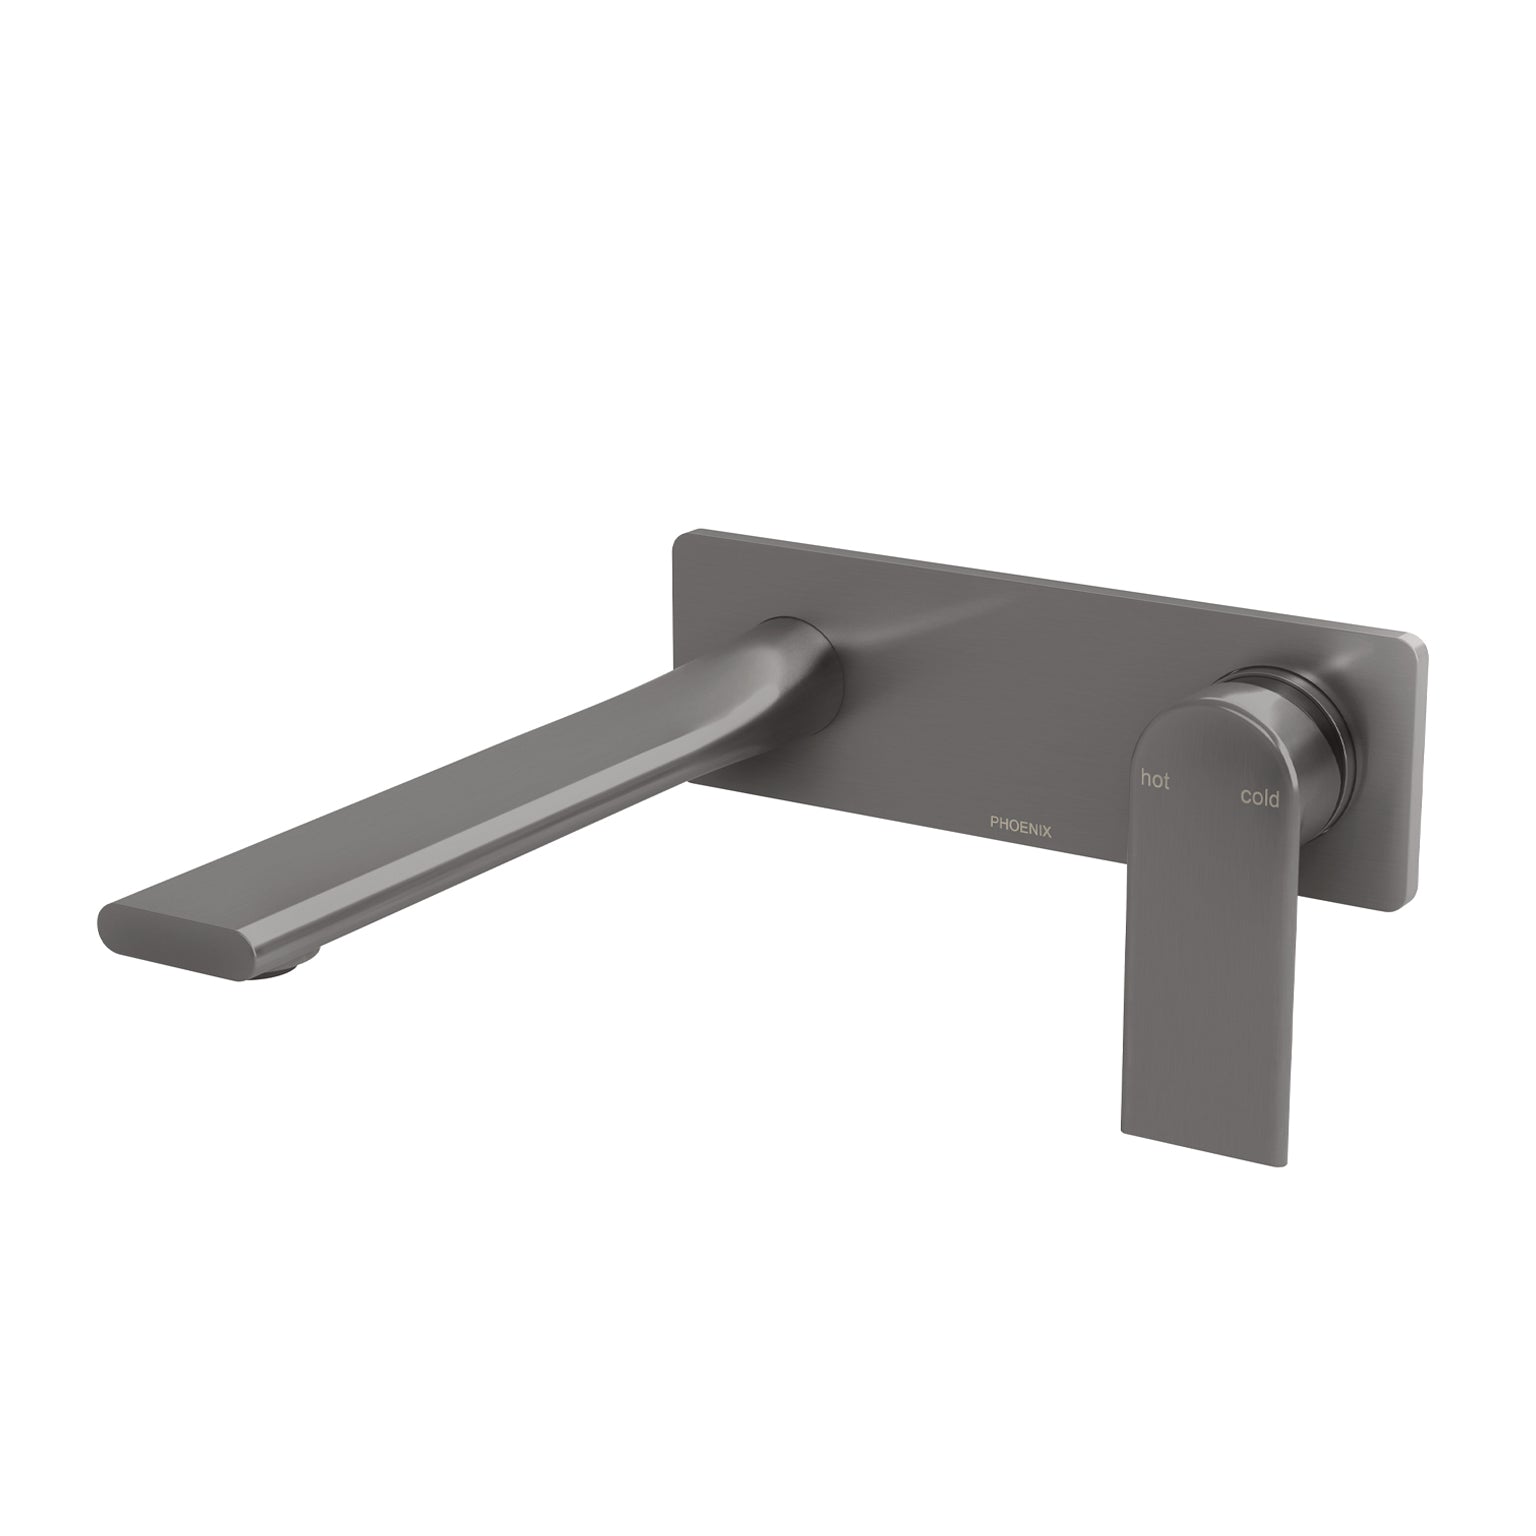 PHOENIX TEEL SWITCHMIX WALL BASIN / BATH MIXER SET FIT-OFF AND ROUGH-IN KIT 200MM BRUSHED CARBON